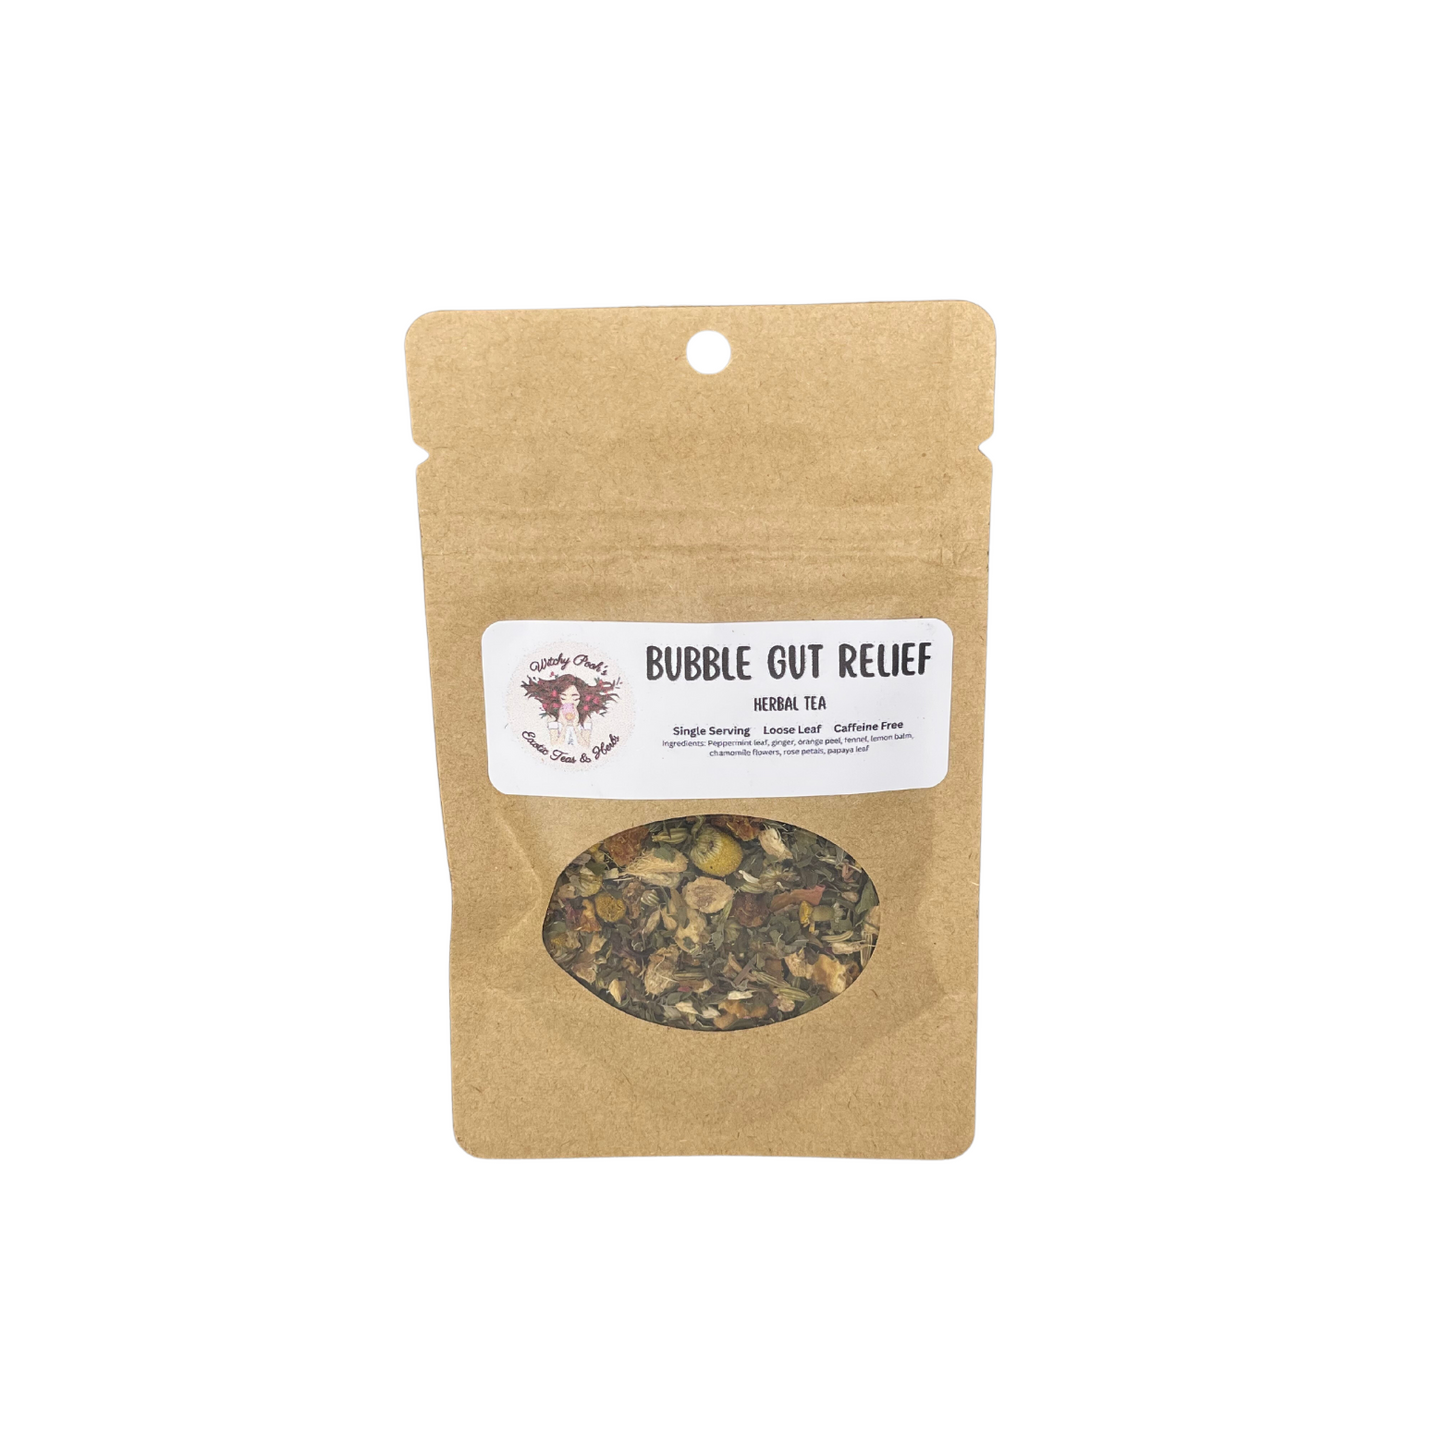 Witchy Pooh's Bubble Gut Relief Loose Leaf Herbal Functional Tea, Caffeine Free, For Digestive Issues-15